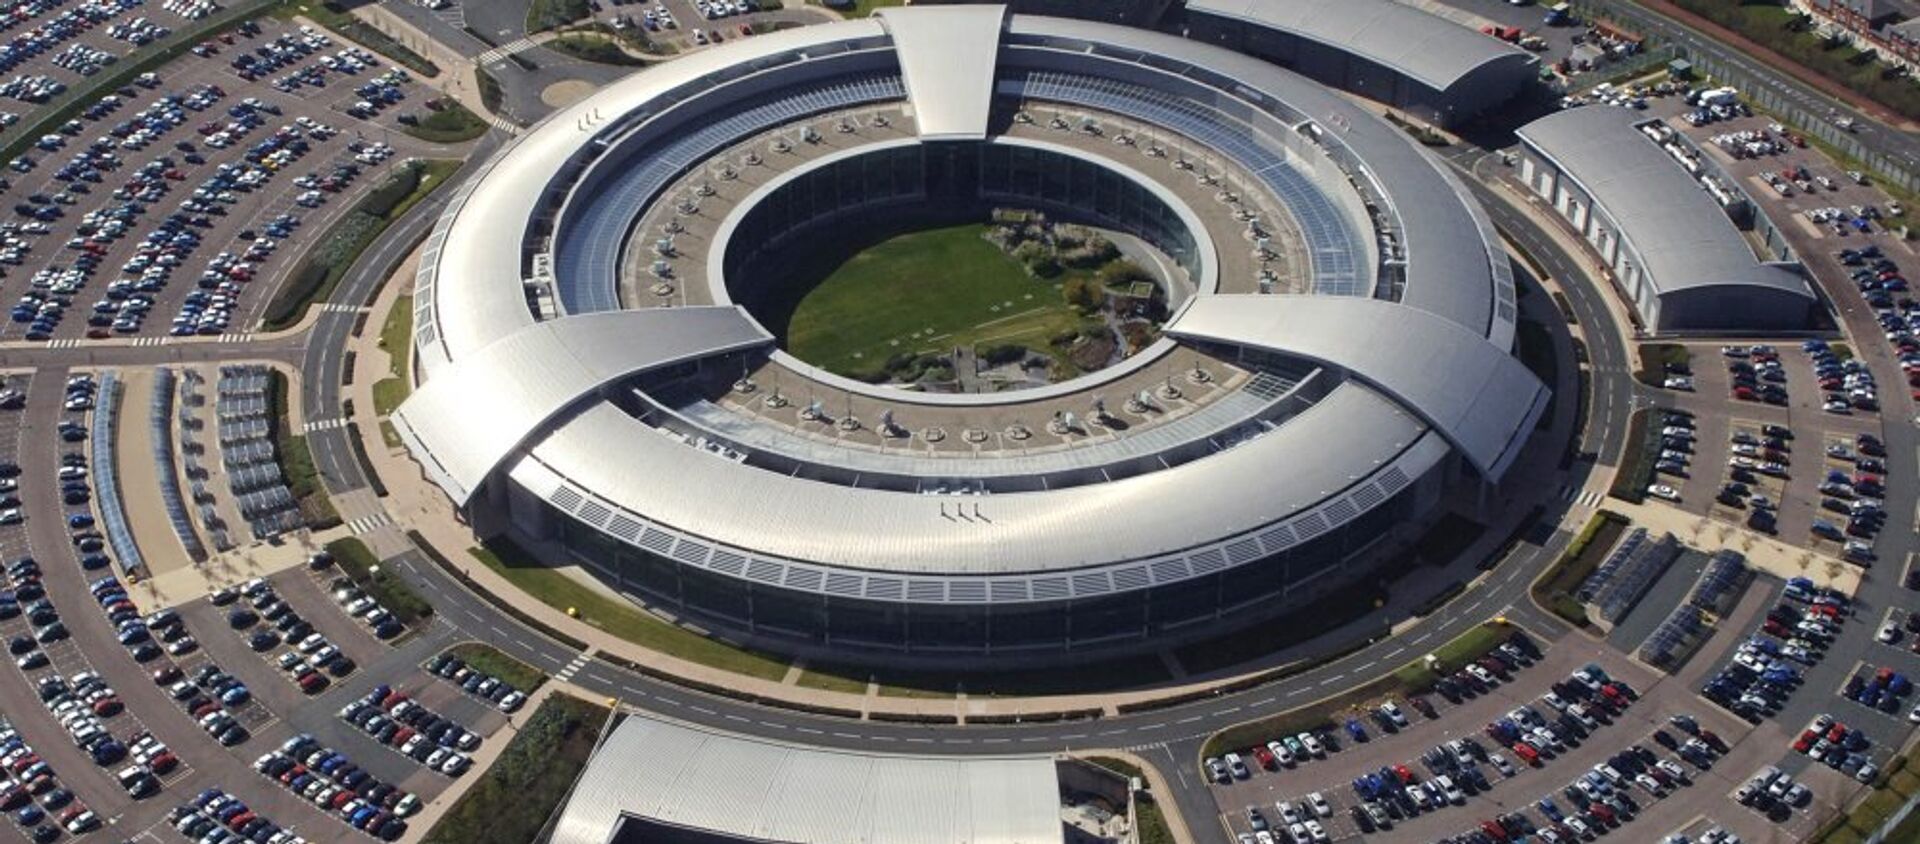 GCHQ Building at Cheltenham, Gloucestershire is on of the intelligence agencies using old laws to spy on people.  - Sputnik International, 1920, 23.04.2021